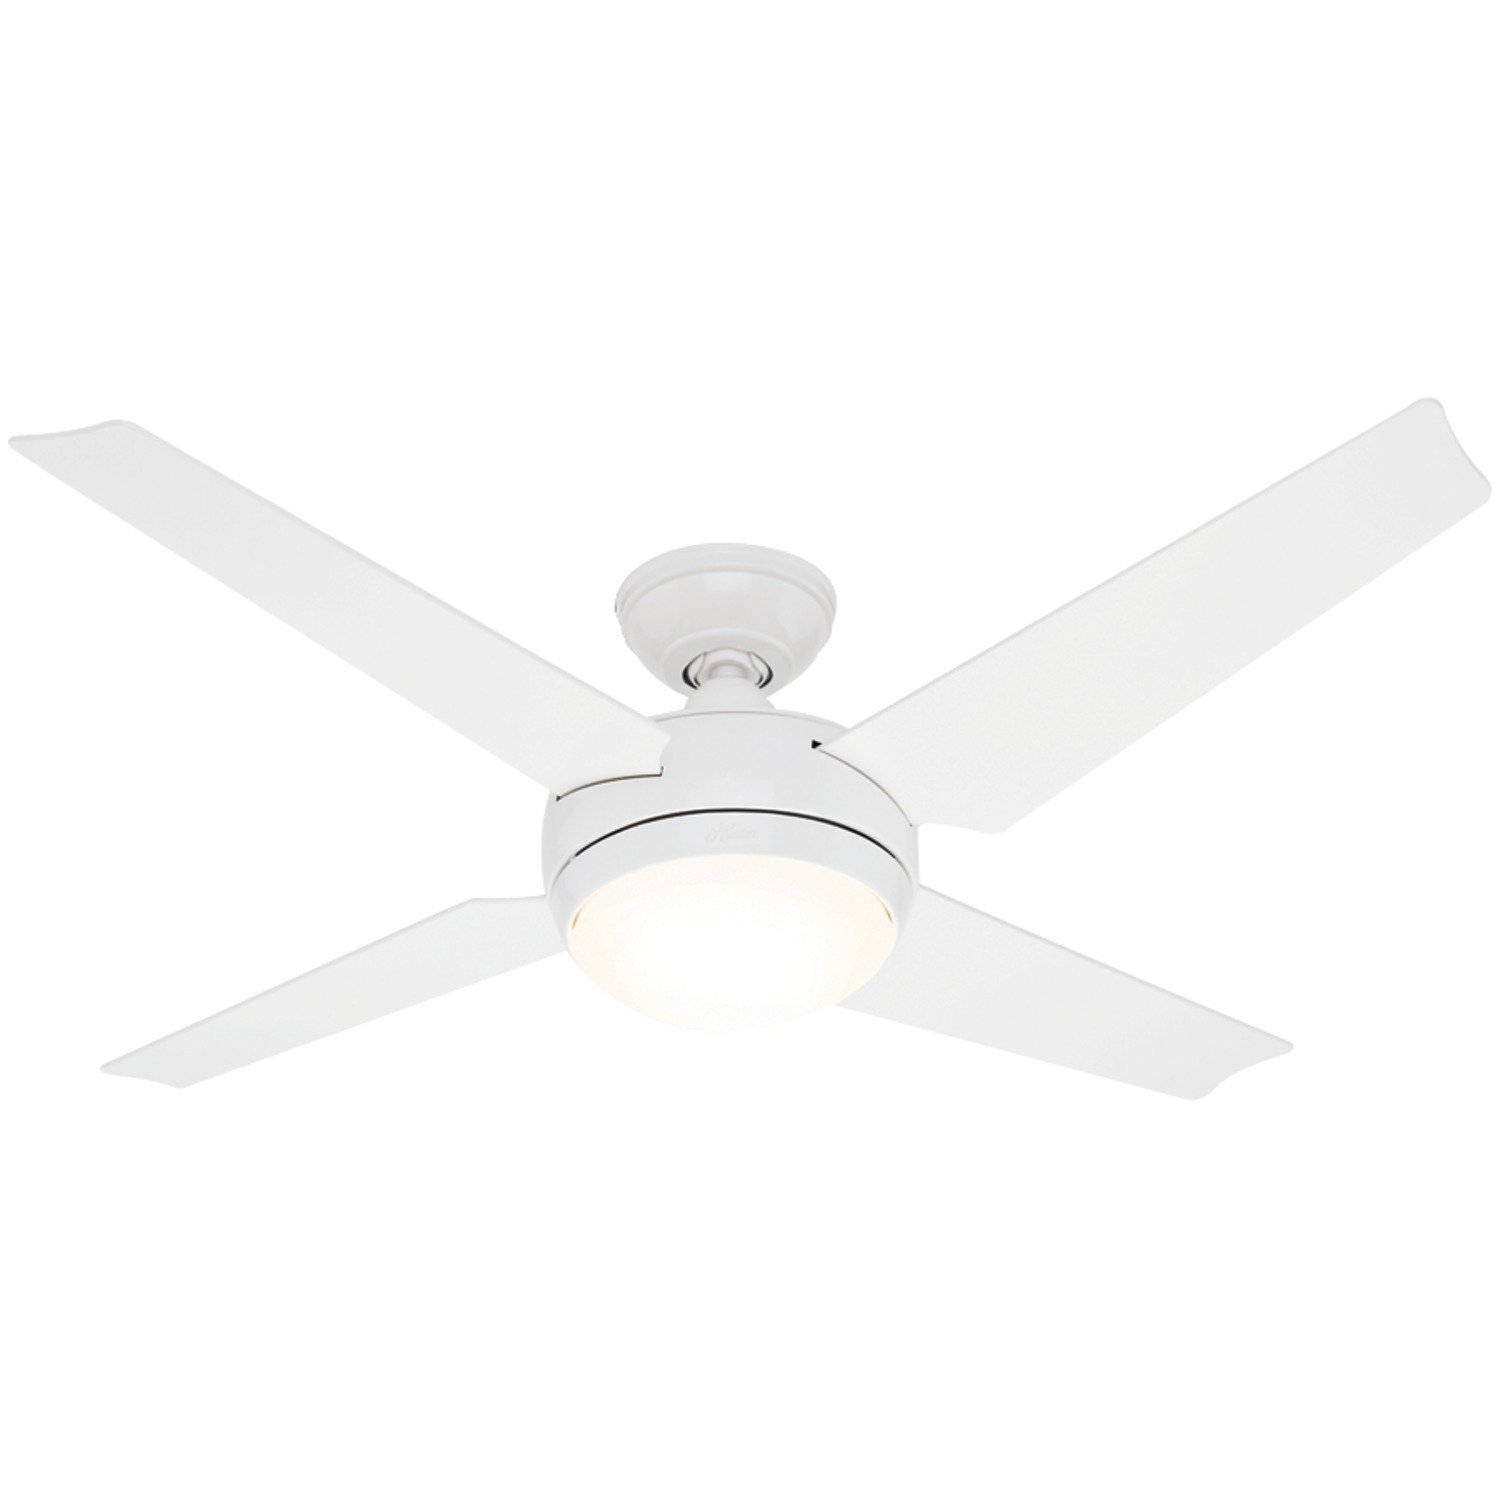 Permalink to White Ceiling Fan Light Remote